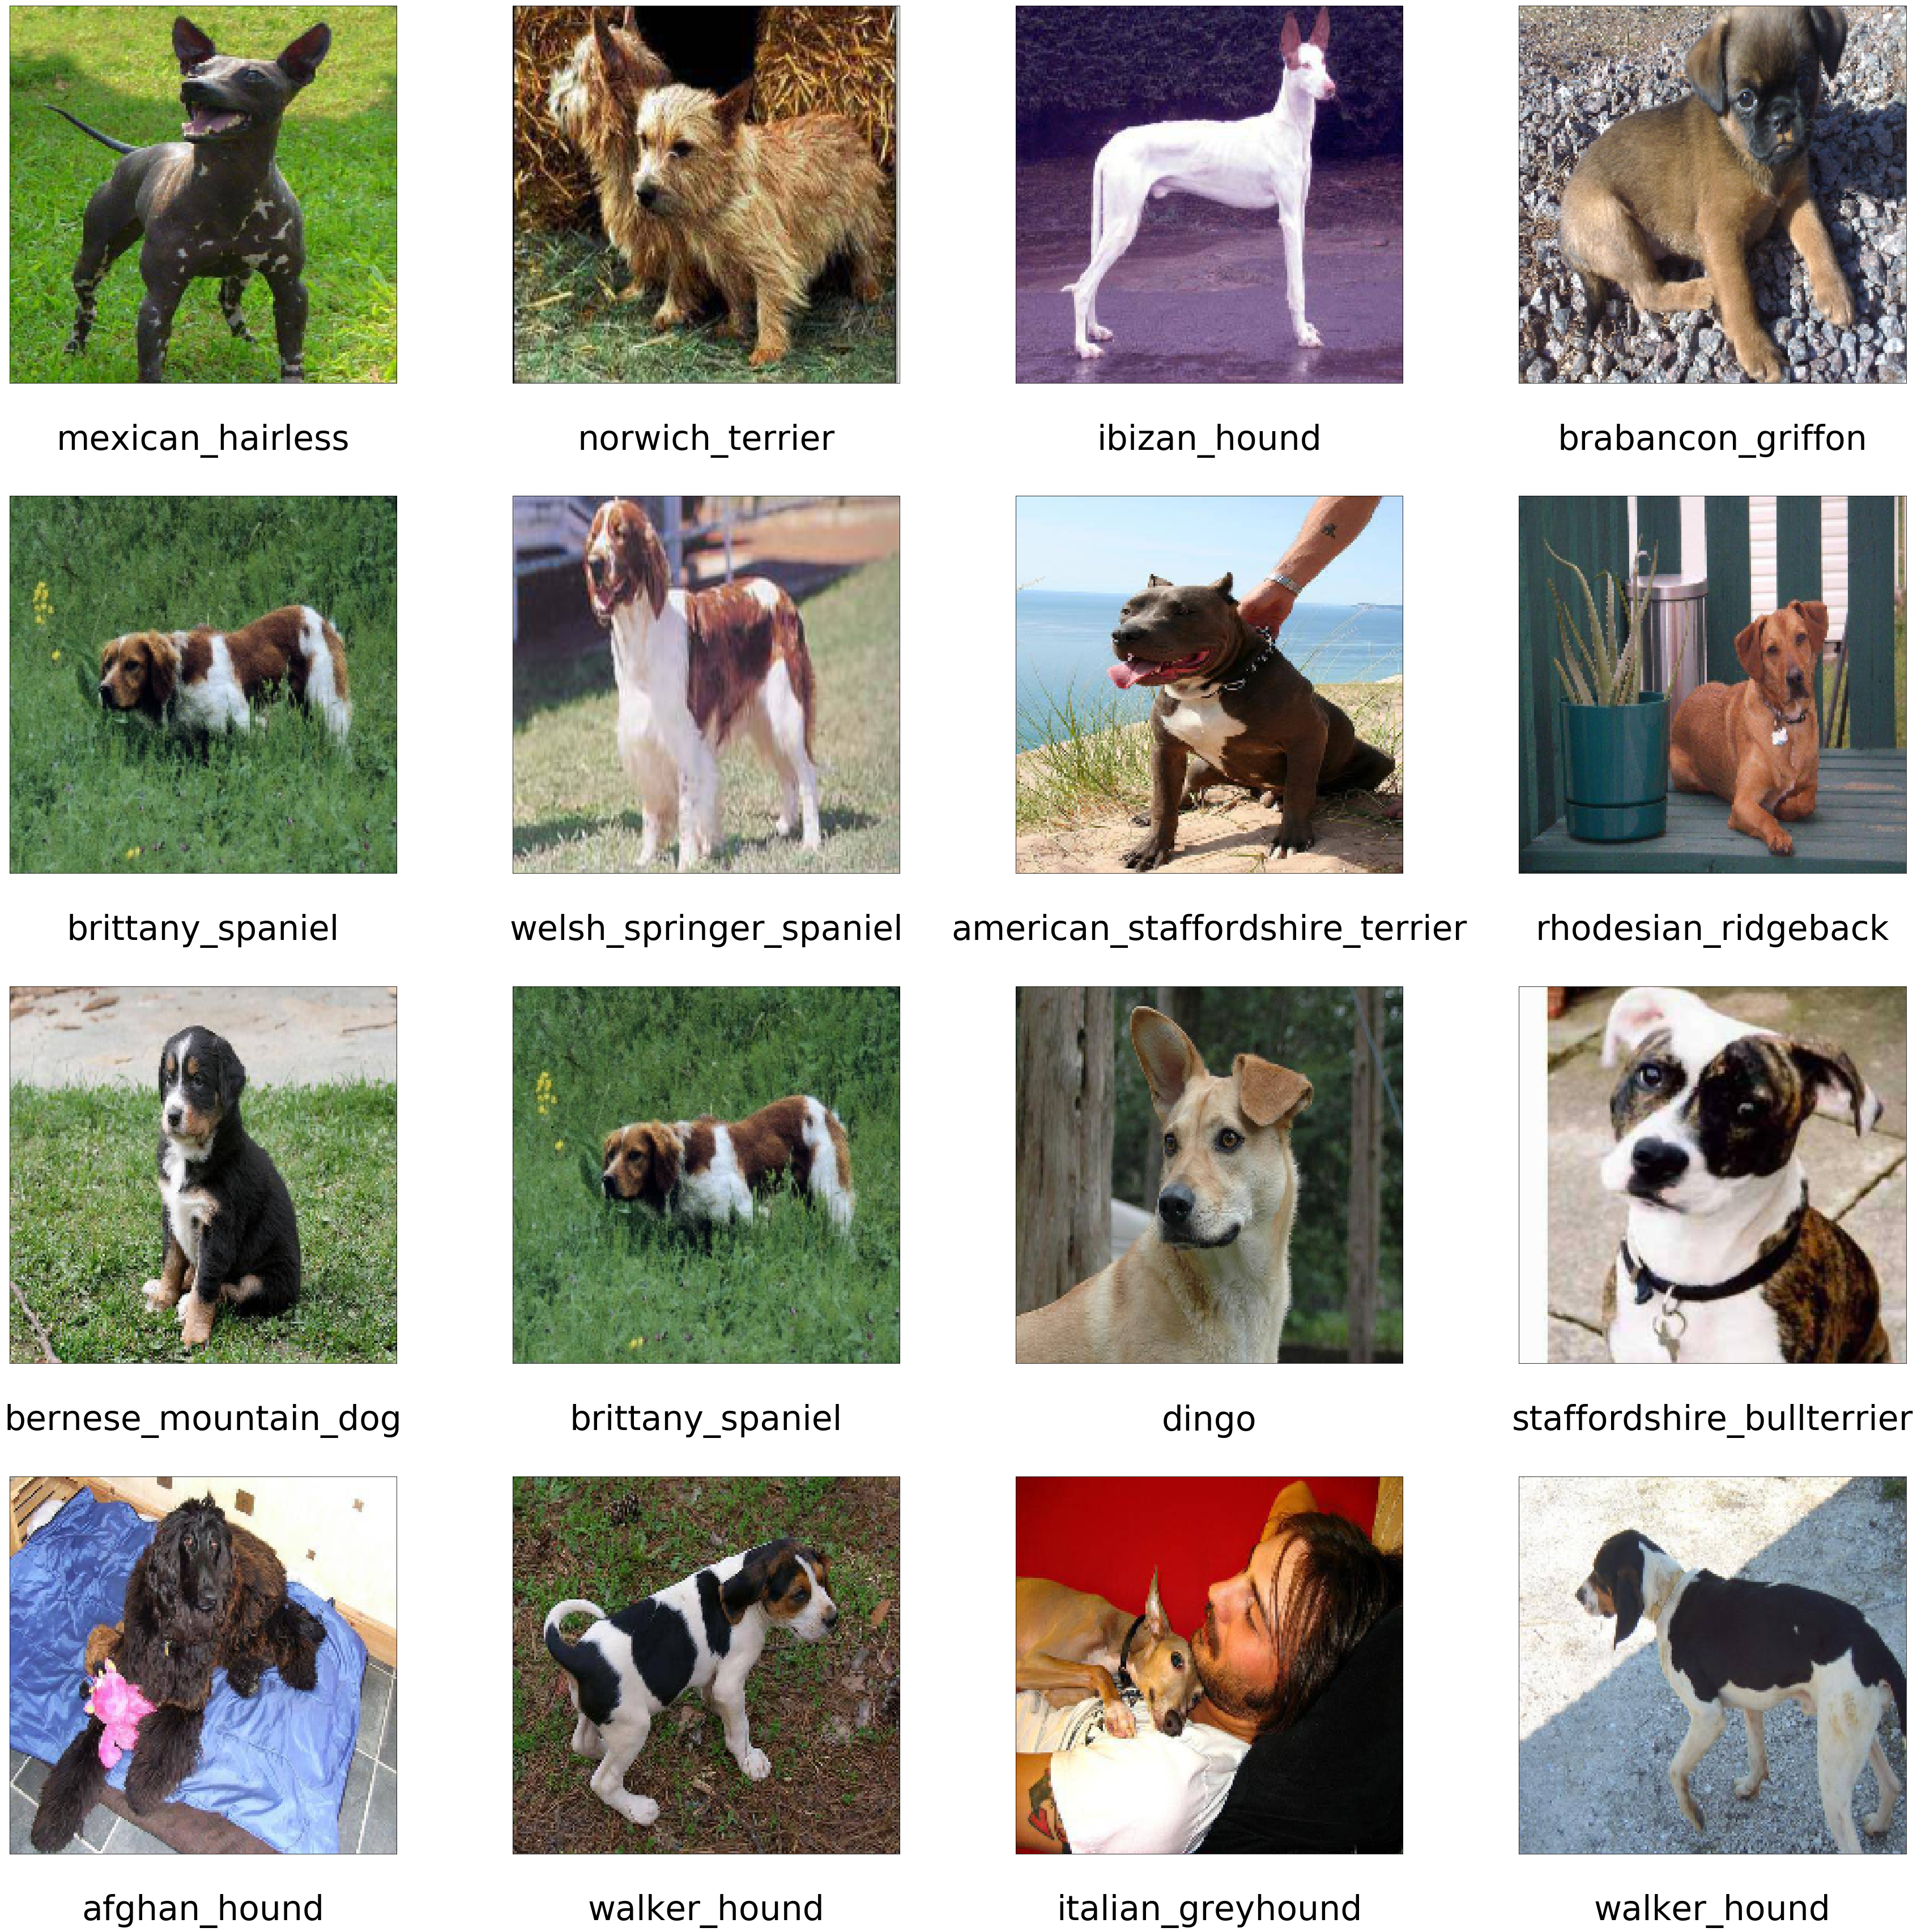 Dog images with their breed name as text